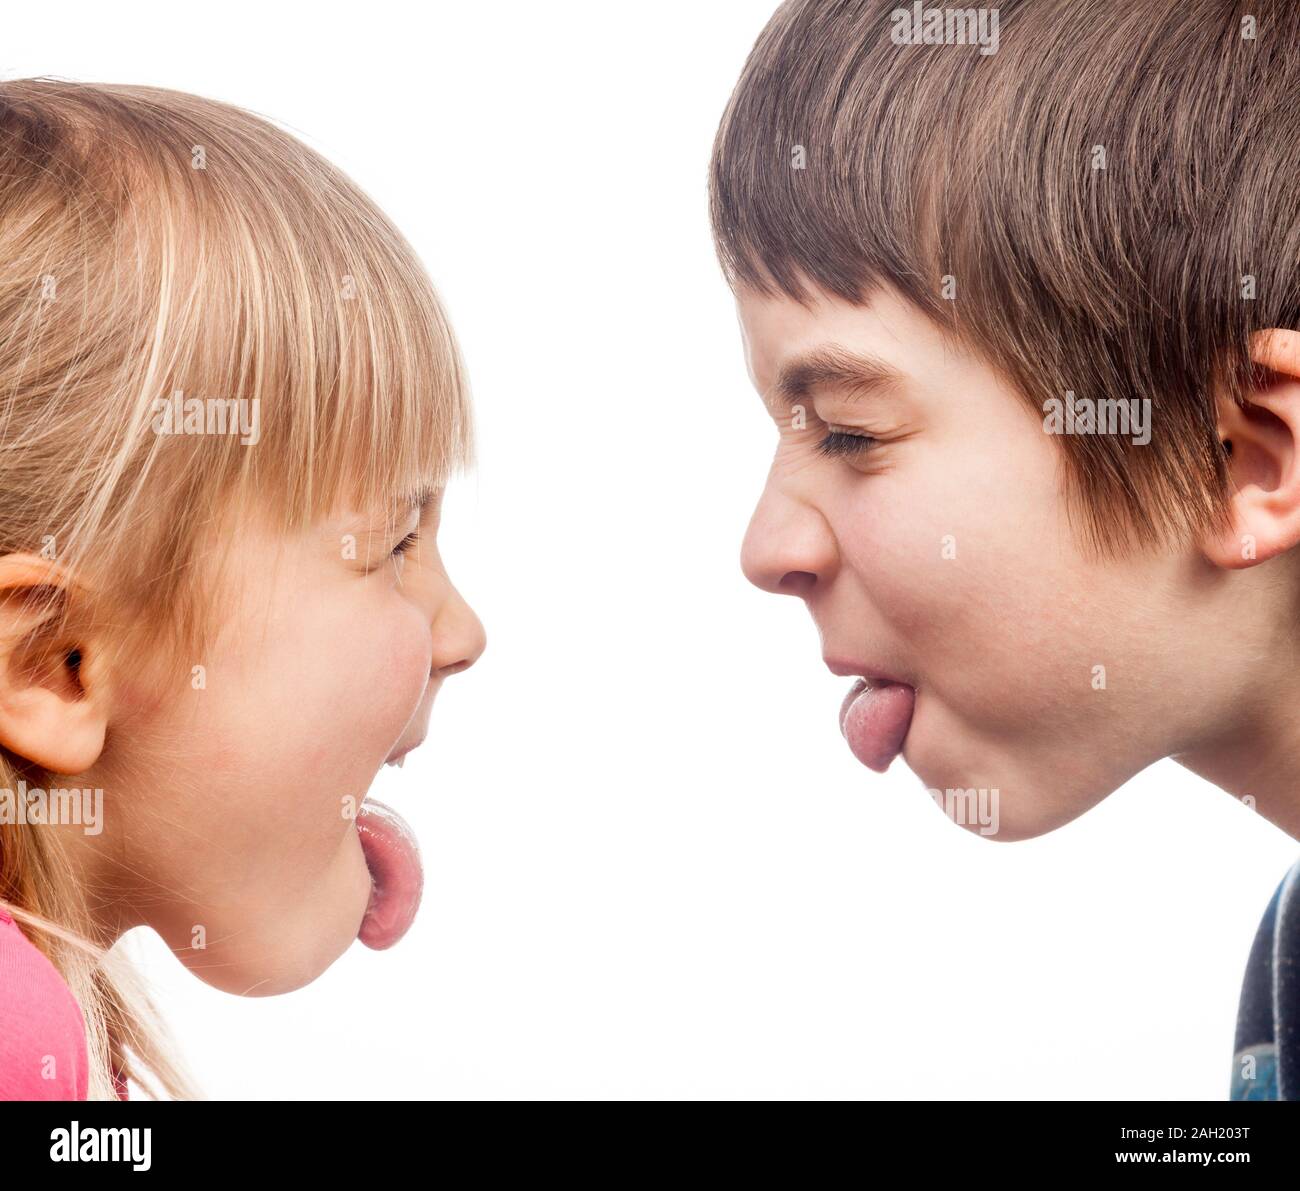 Sister and brother stick out tongues to each other Stock Photo